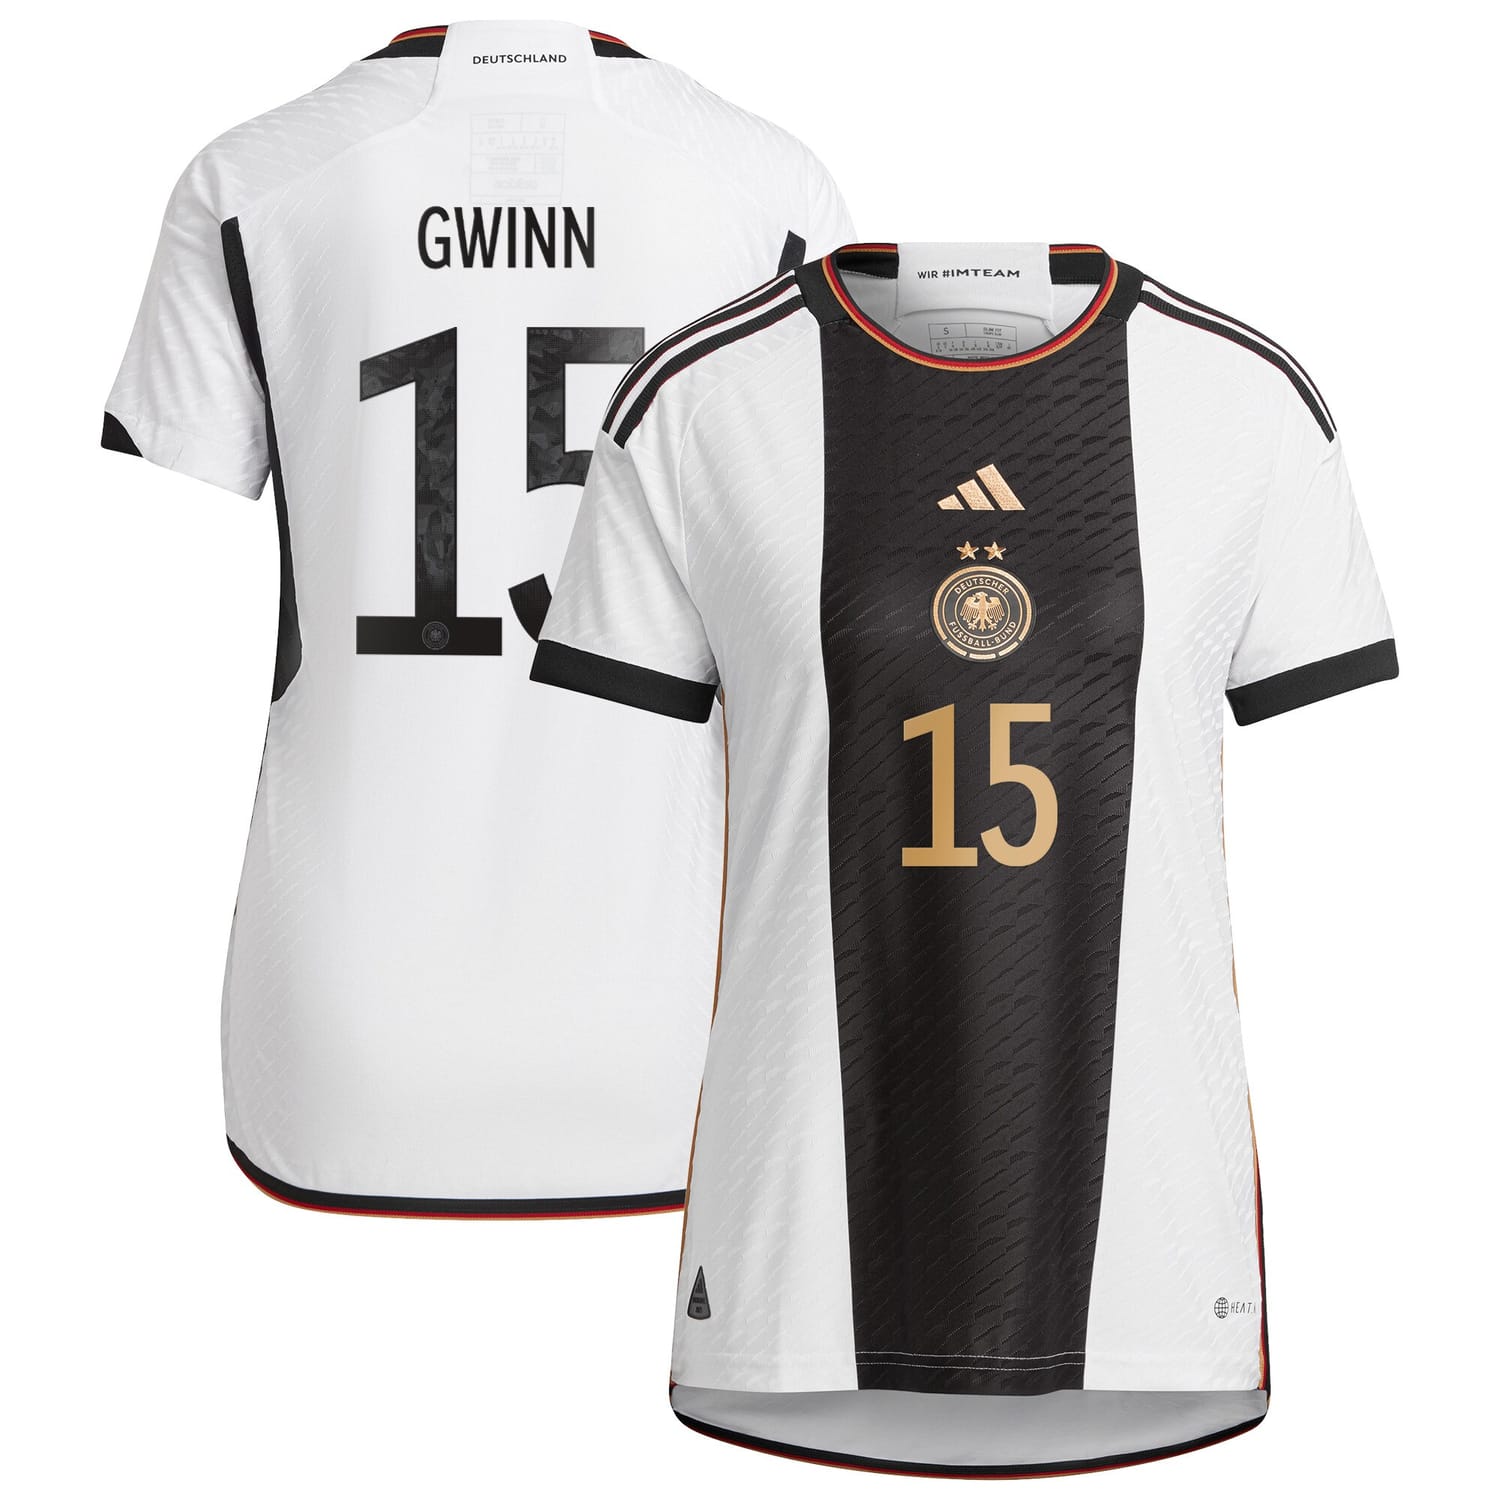 Germany National Team Home Authentic Jersey Shirt player Gwinn 15 printing for Women